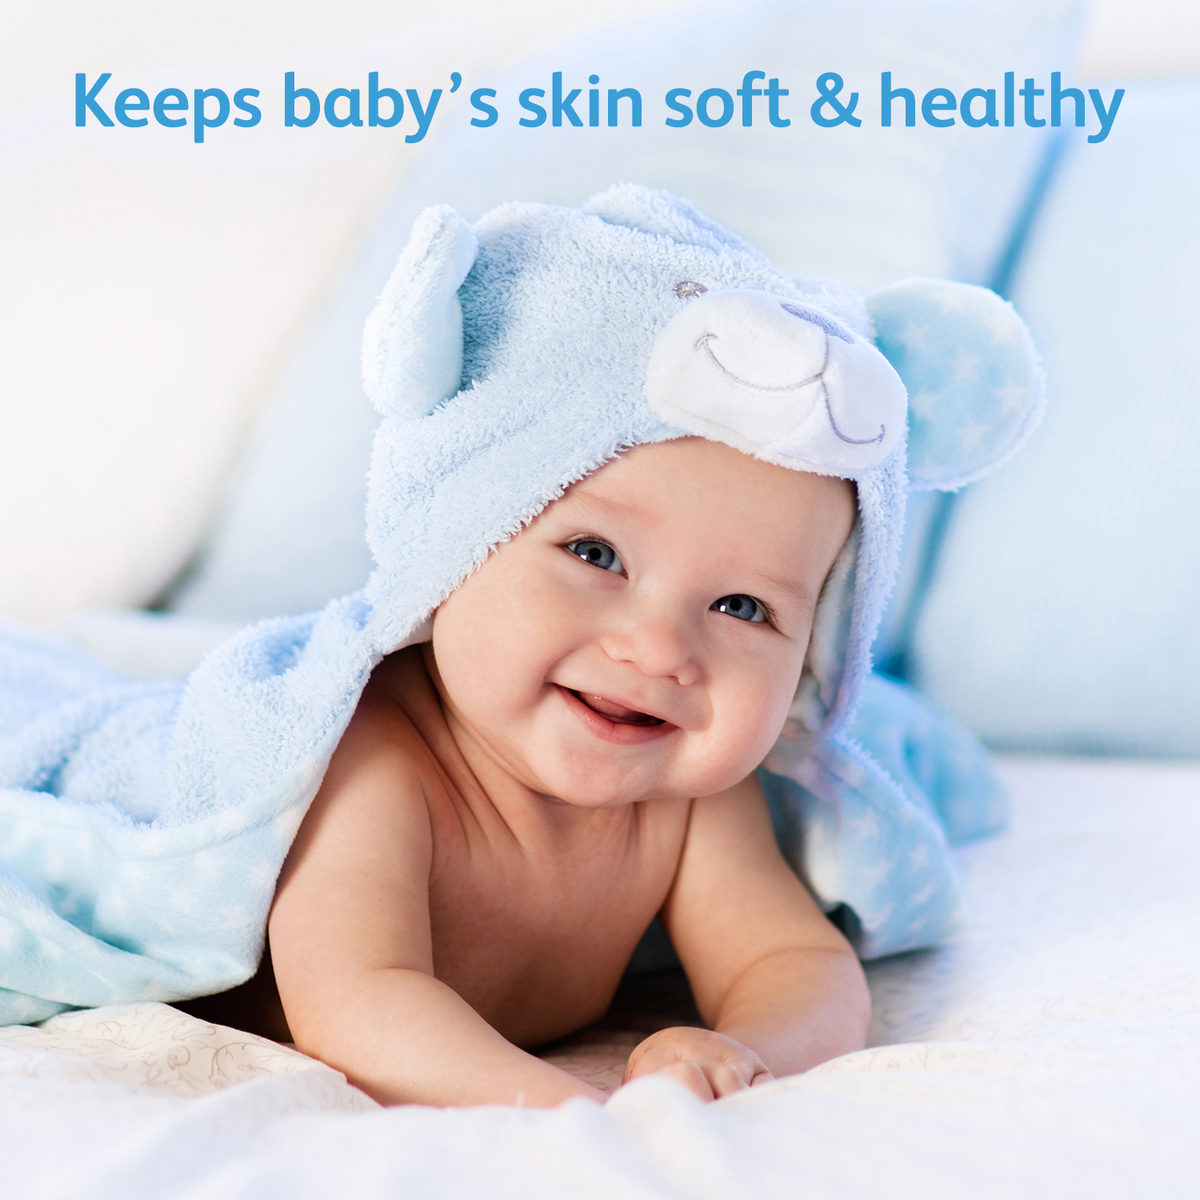 Johnson's Baby Cleansing Wipes Head-To-Toe Skincare 15pcs